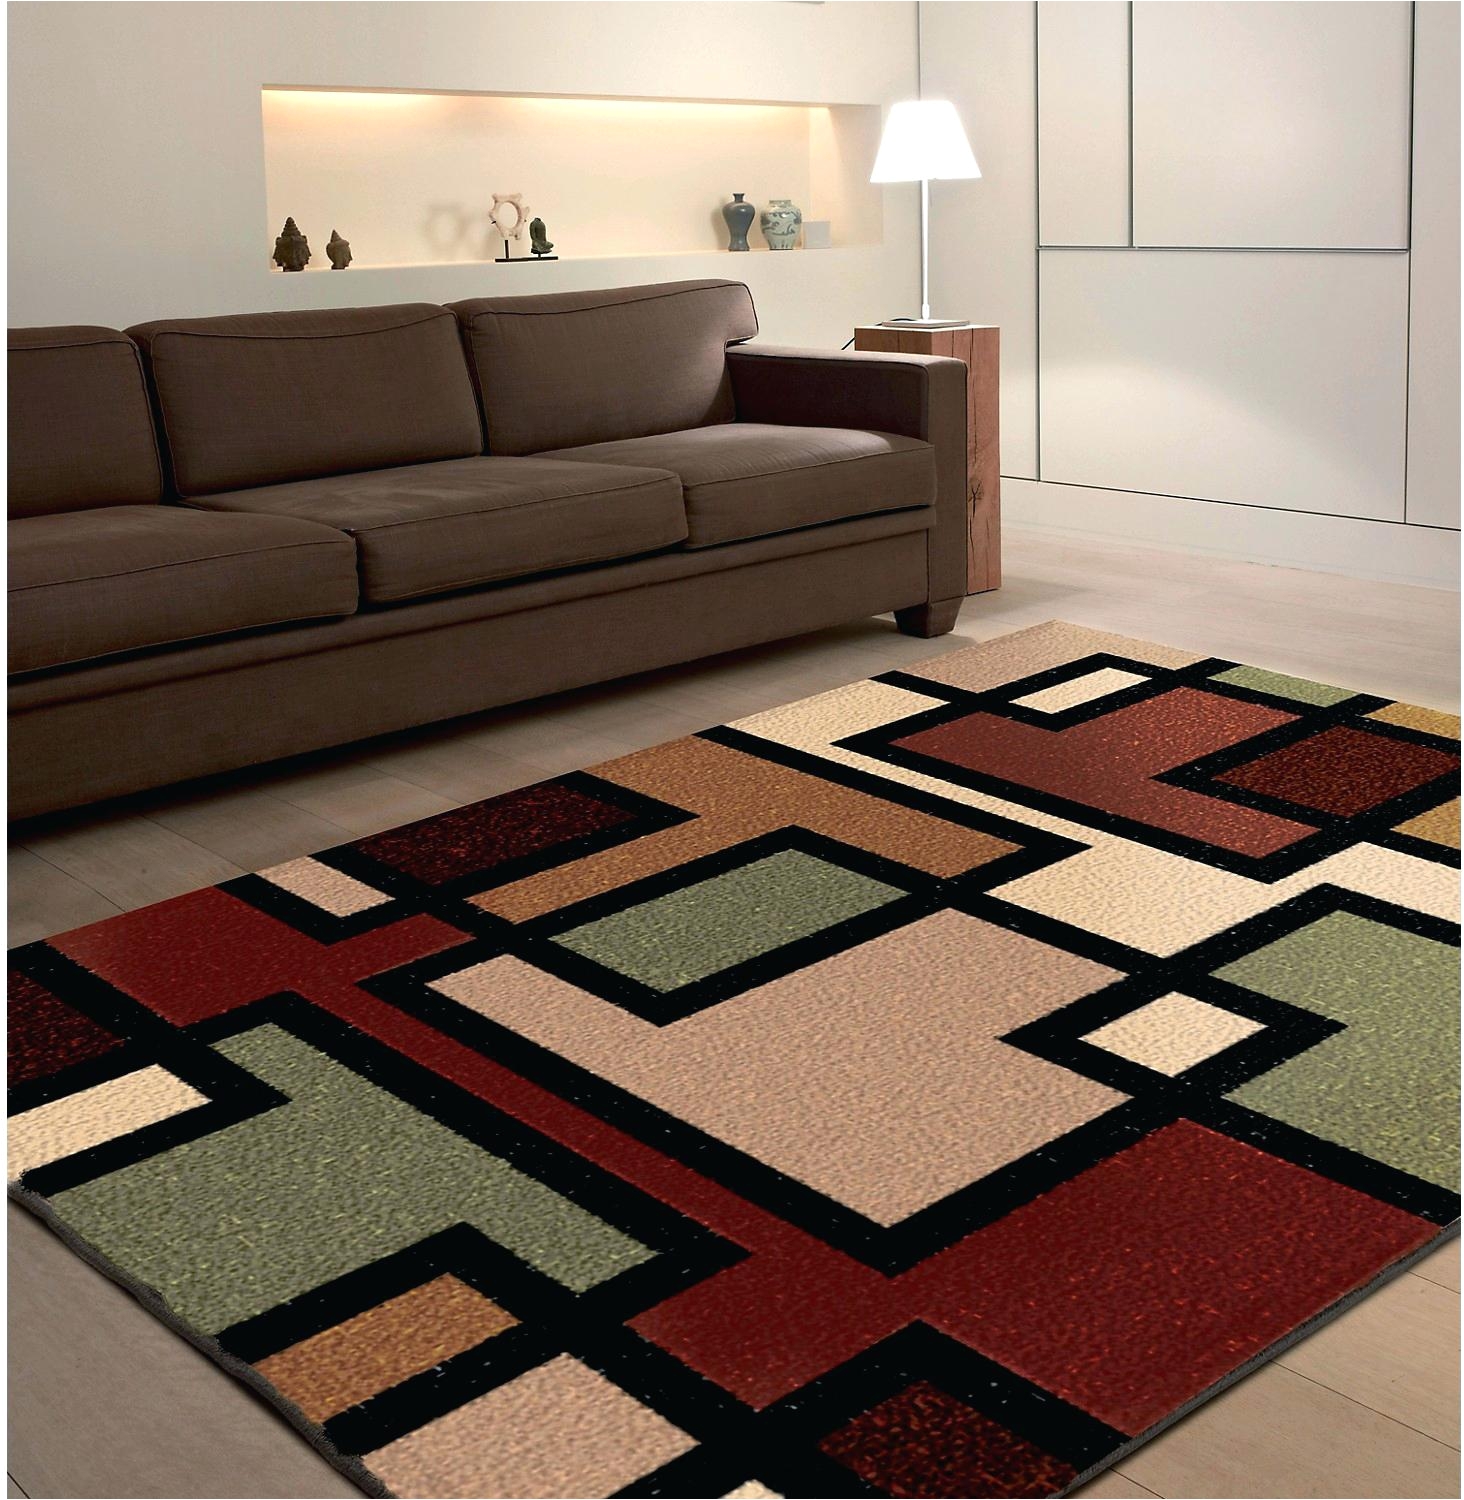 full size of 5x7 area rugs fundamentals kohl s rugs 5x7 5 7 area rug a